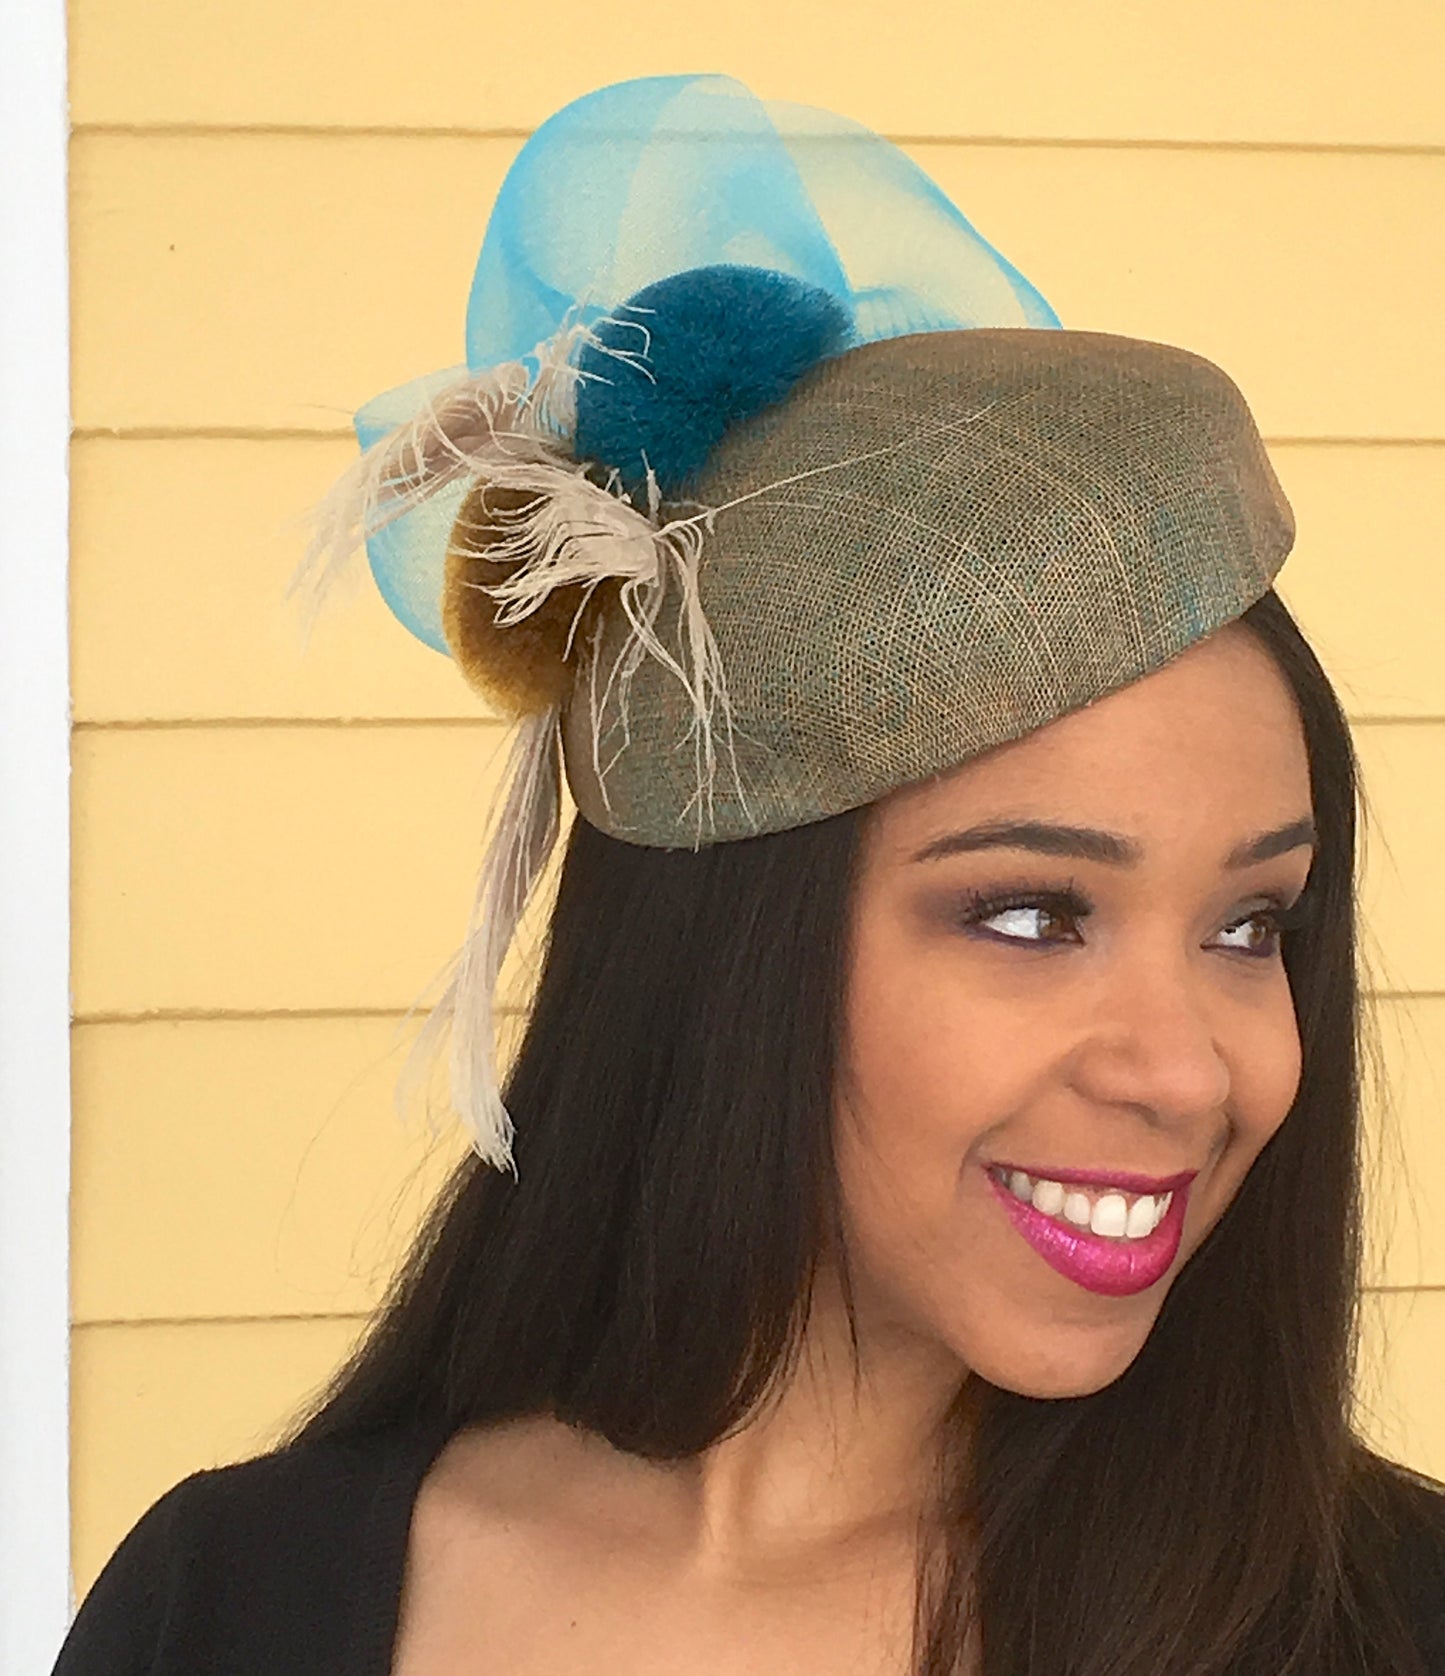 Taupe and Turquoise Sinamay Pill Box Hat-Silk Pom Poms-Peacock feathers-Crinoline-Race Track hat-Party hat-Royal Ascot-Belmount-Preakness